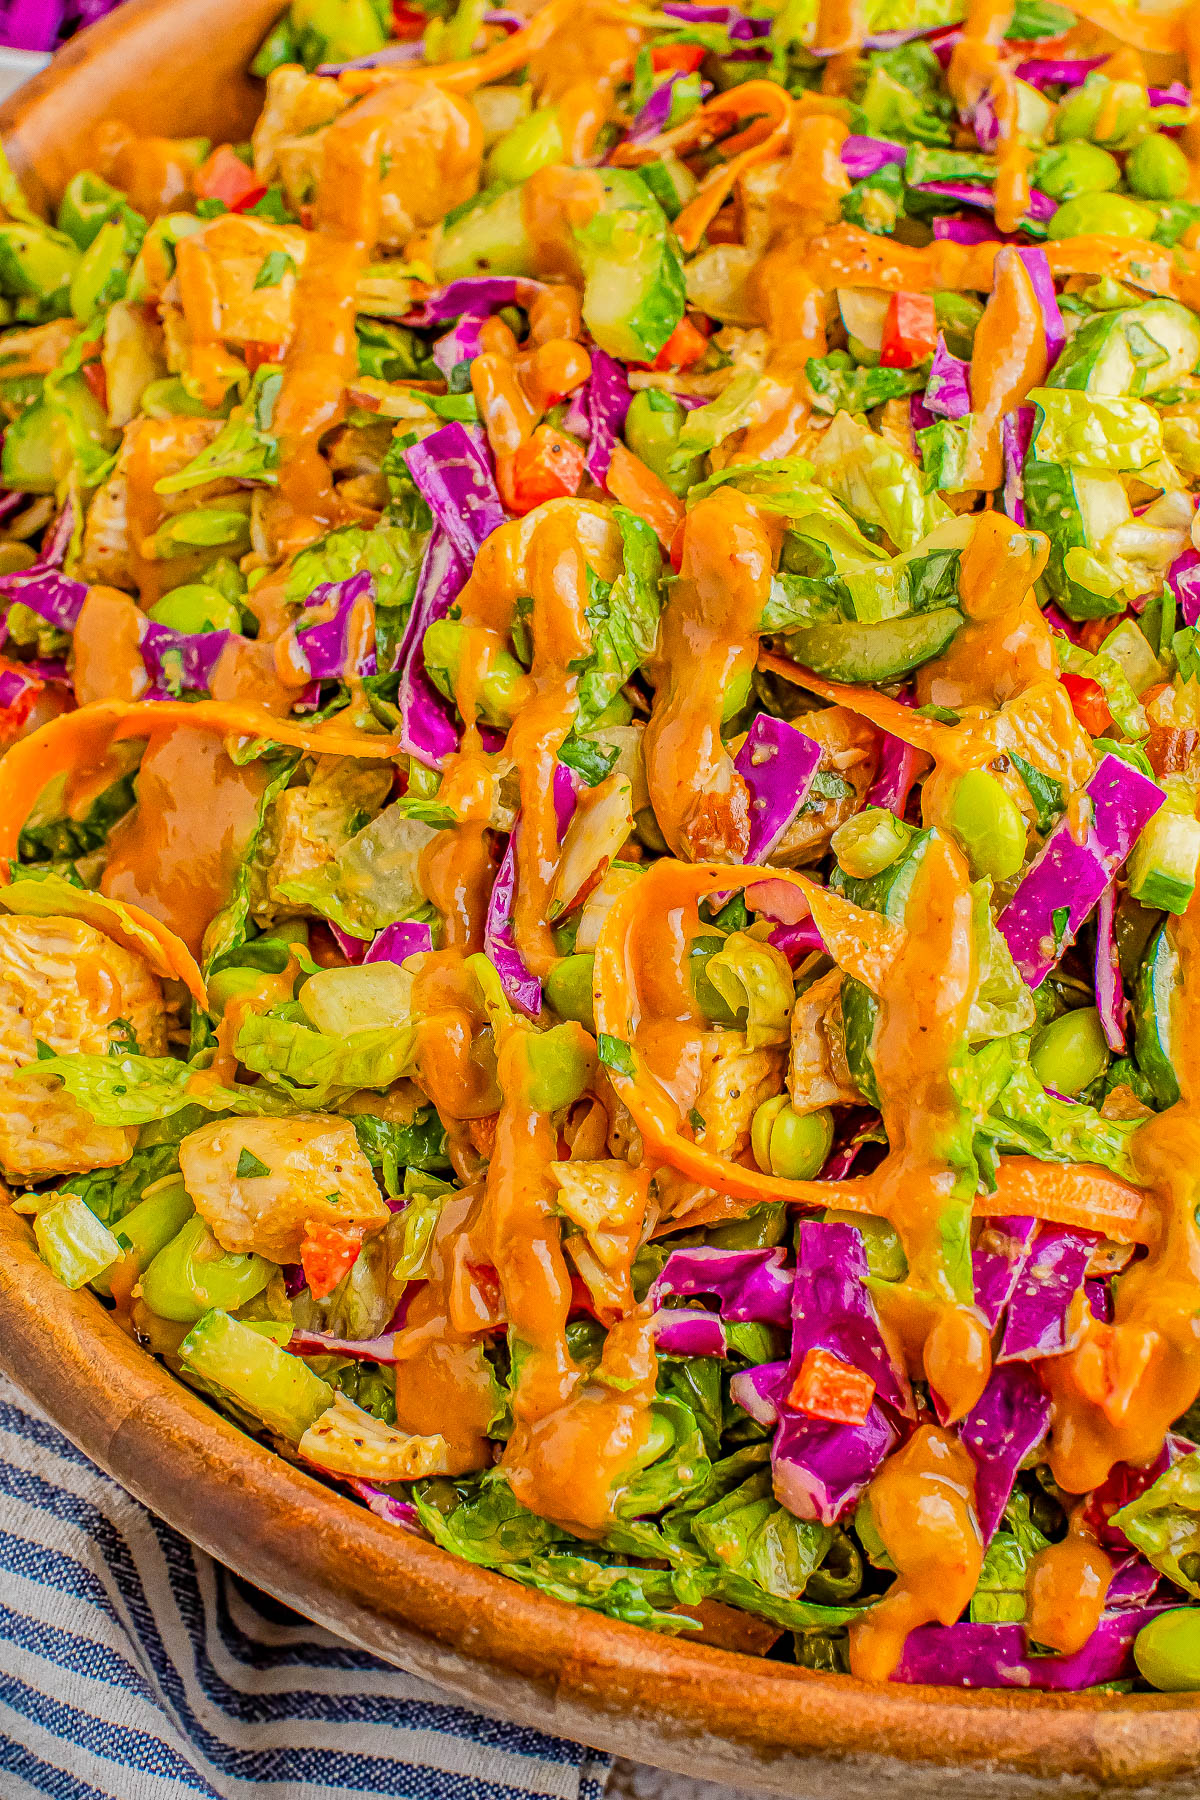 A close-up of a colorful salad with chopped vegetables and mixed greens, topped with a drizzle of dressing. The salad includes carrots, purple cabbage, edamame, and other assorted vegetables.